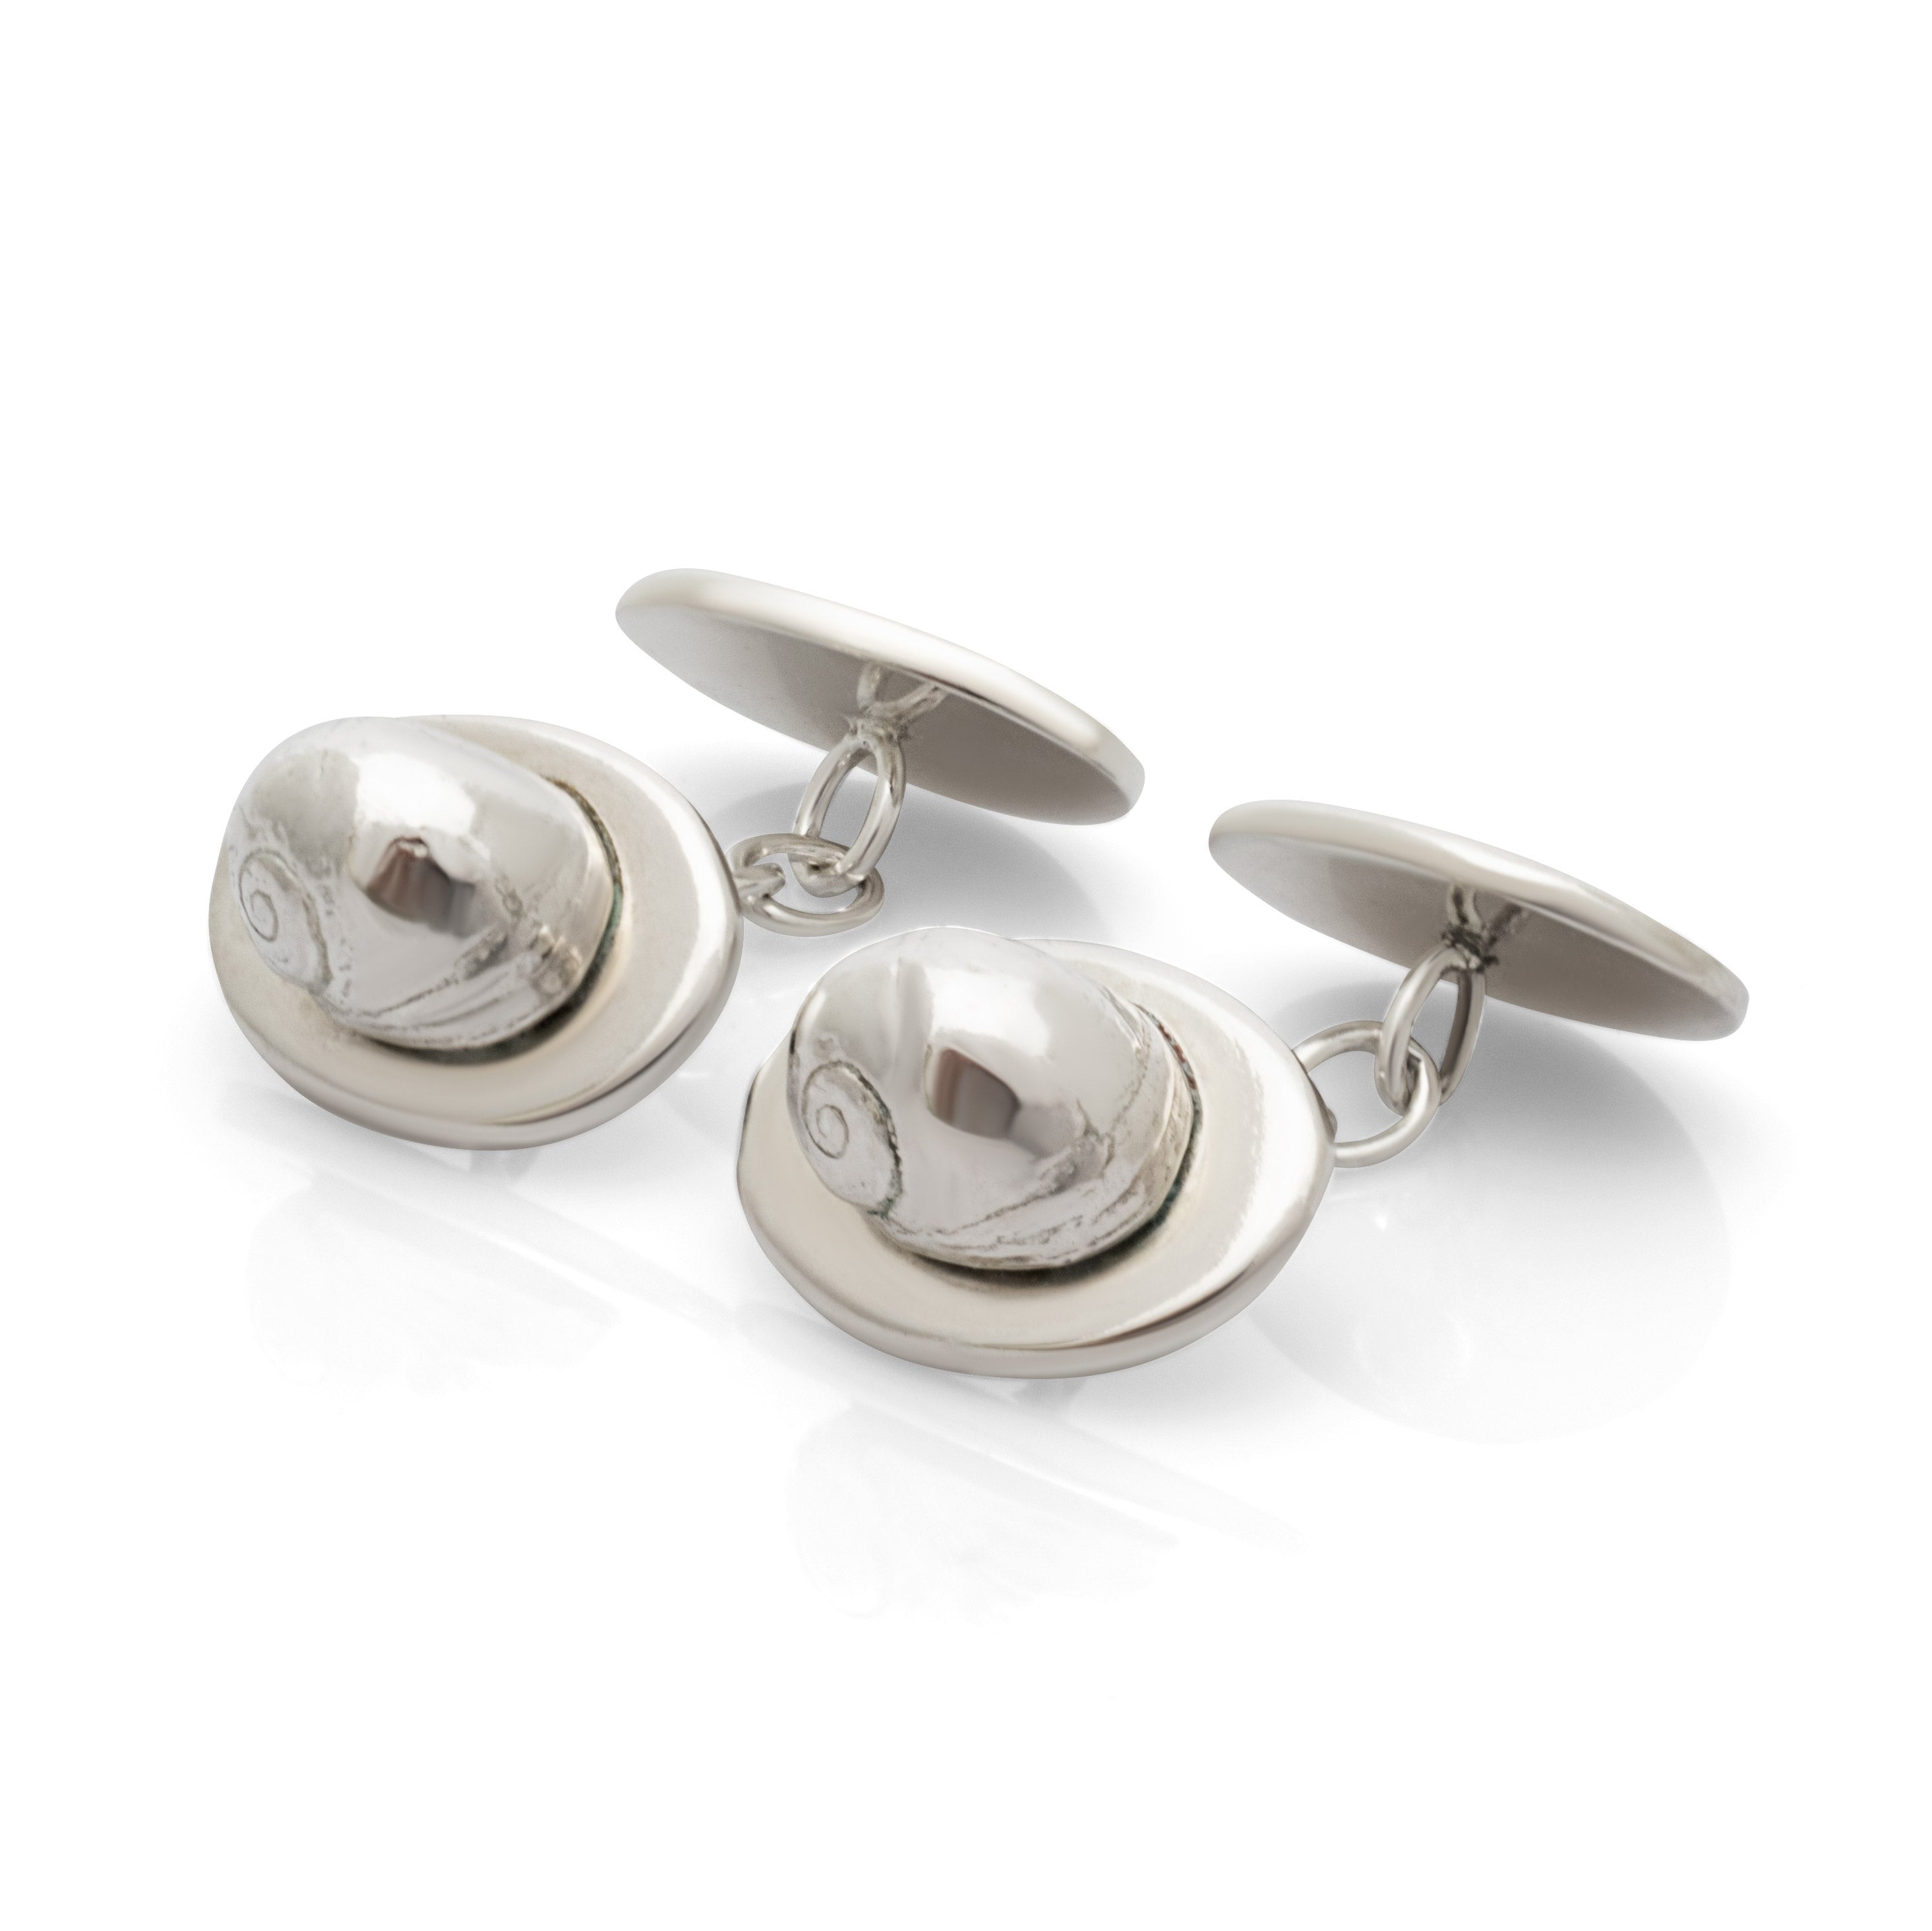 Constantine Bay cufflinks. Constantine Bay cufflinks. Constantine Bay Cornwall. Cornwall jewellery. Cornwall shell jewellery. Silver shell jewellery. Those Happy Places. Serena Ansell Jewellery.